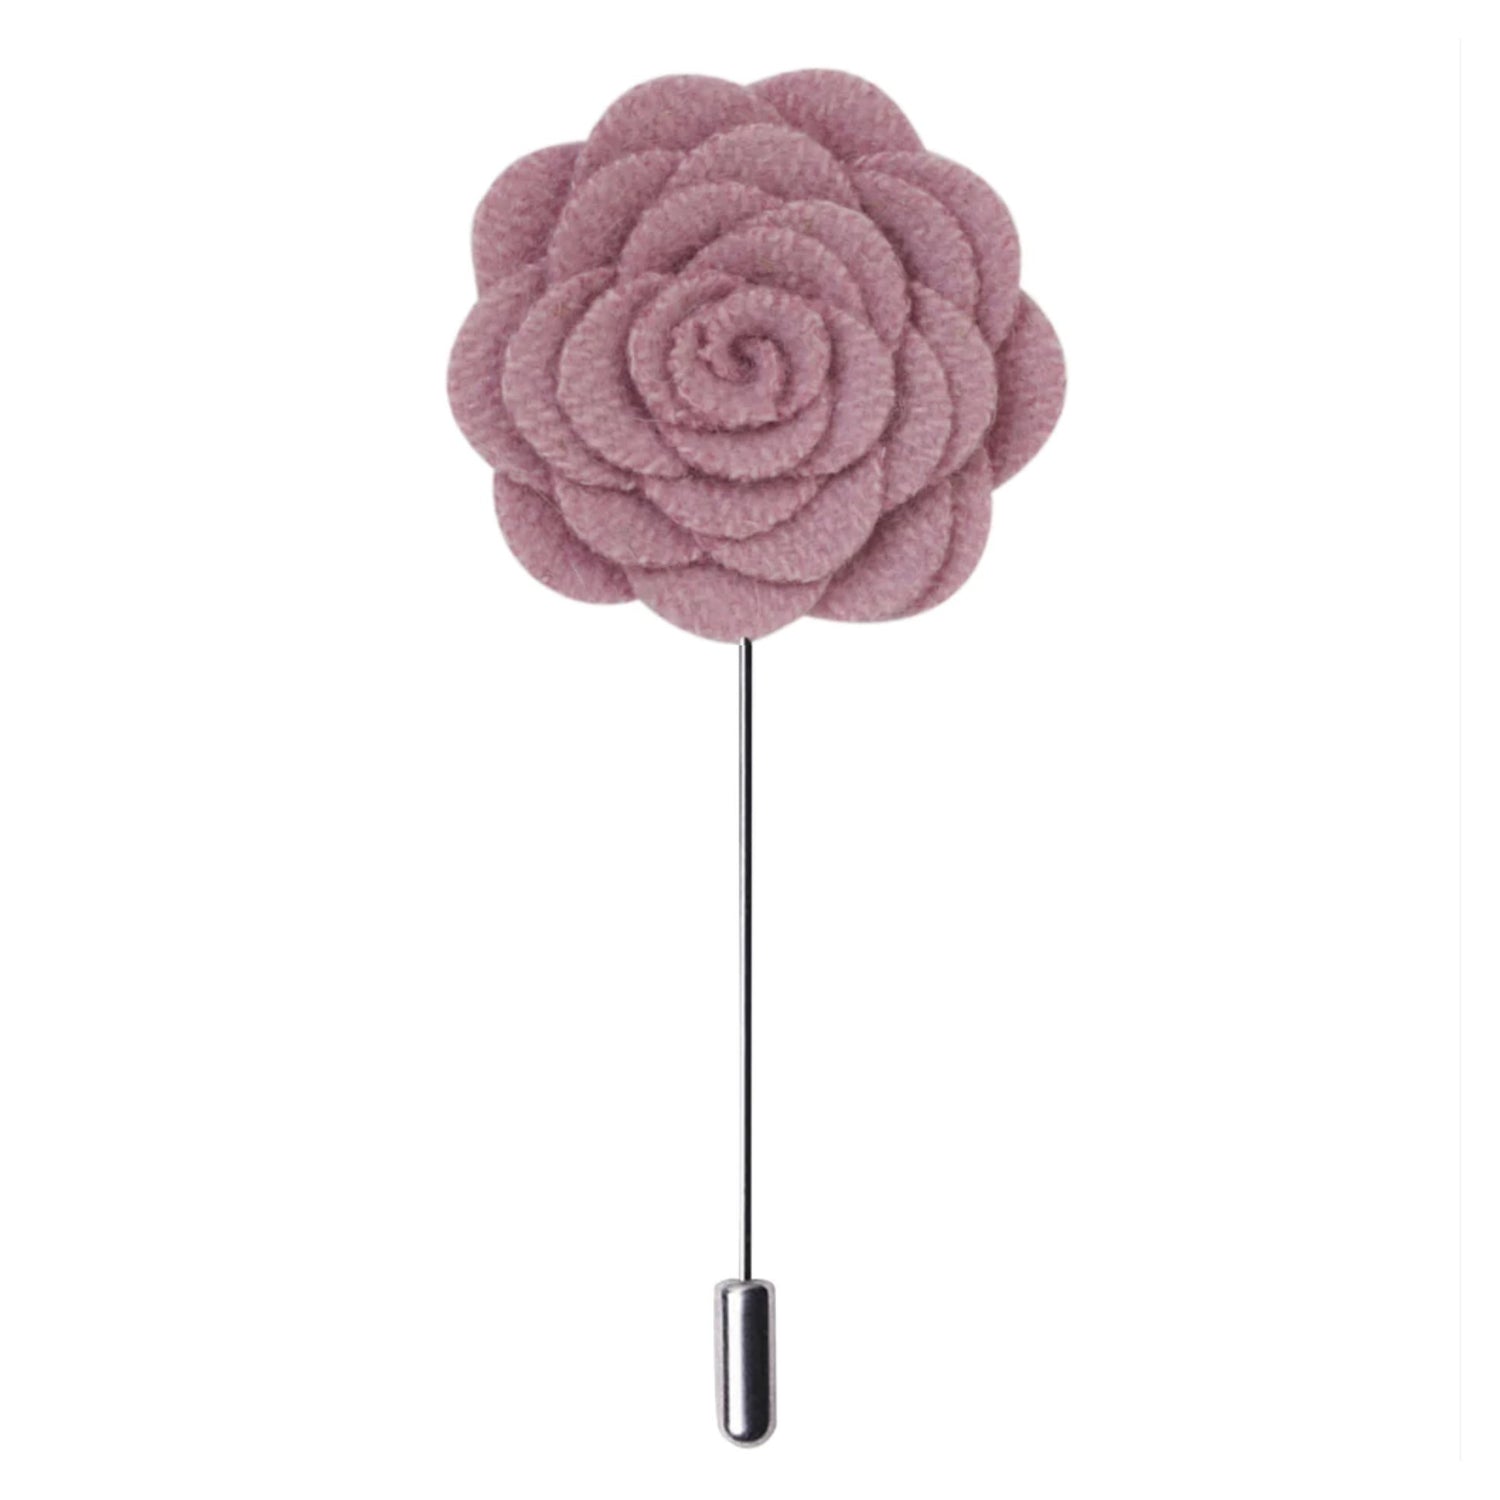 A Solid Pink Wide Petal Flower Shaped Lapel Pin||Pink